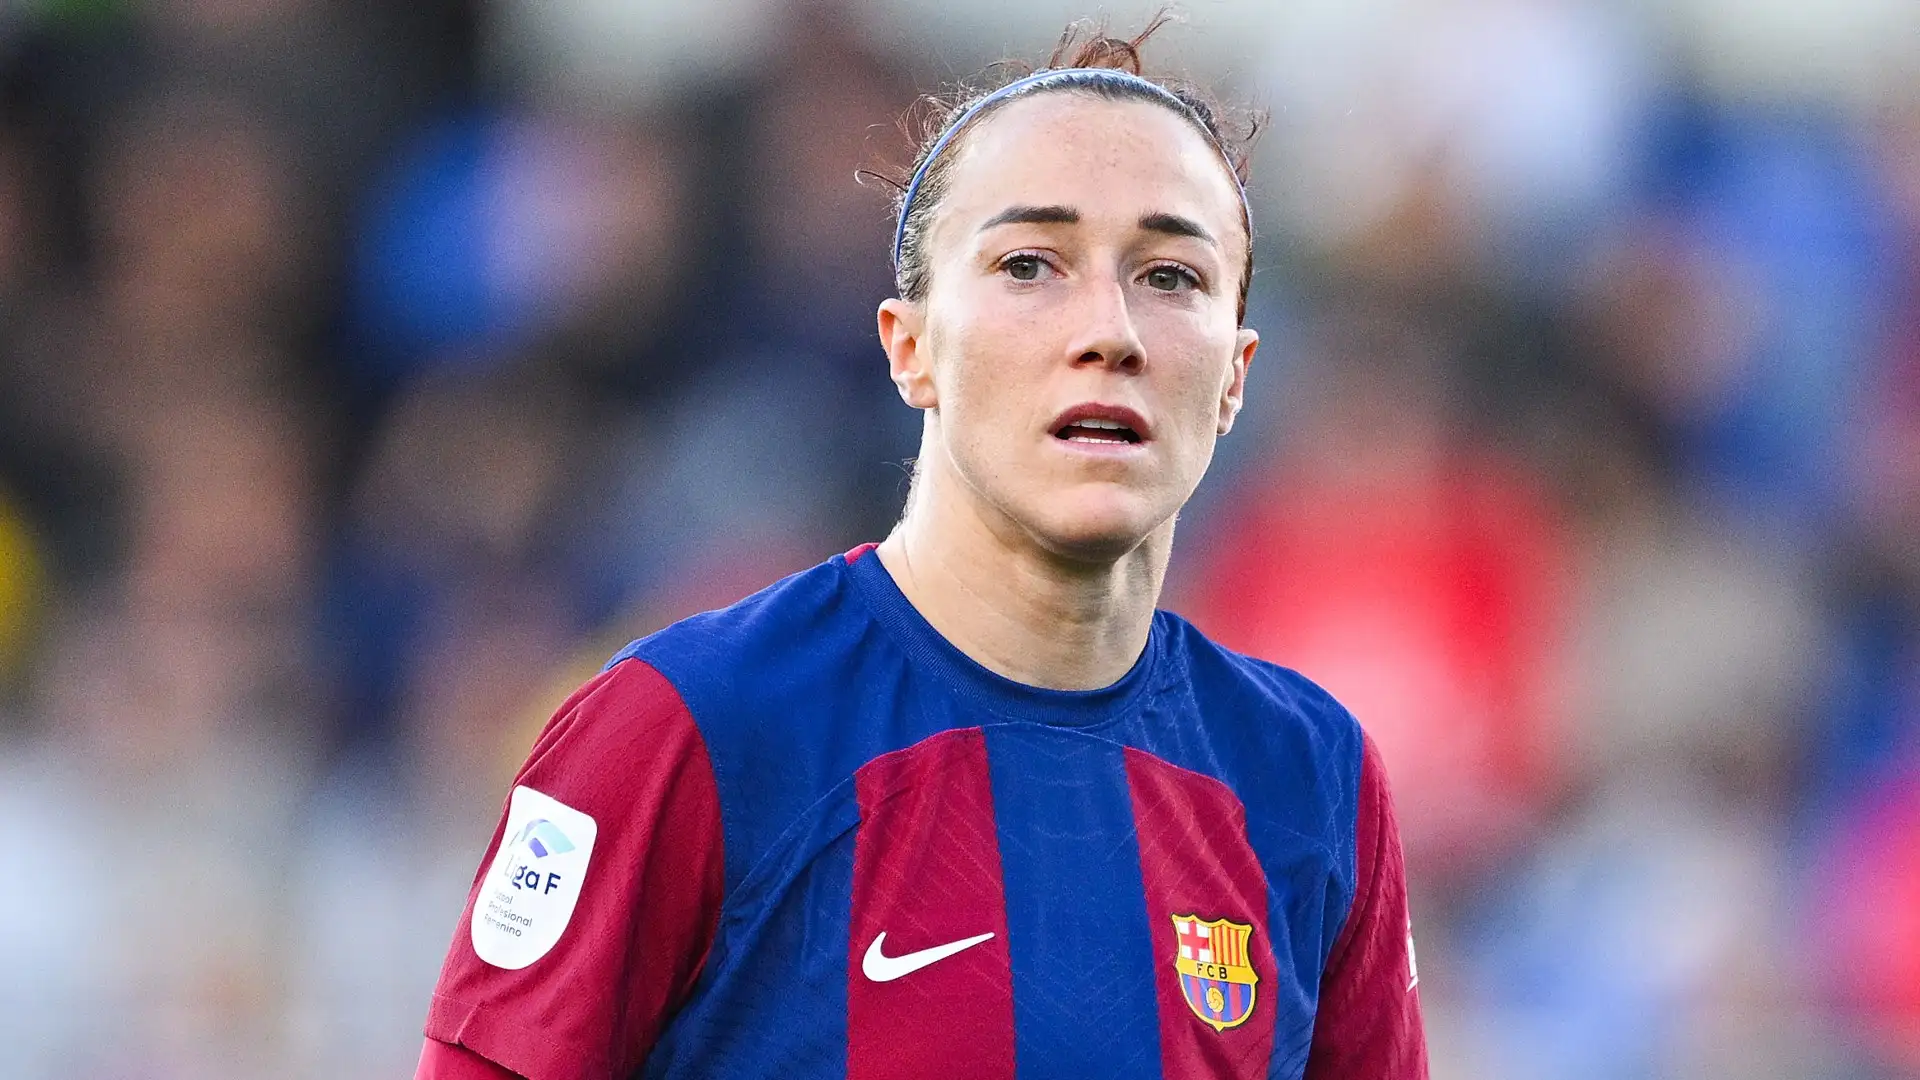 Will Lucy Bronze stay at Barcelona? Lionesses star set to receive 'better offers' from abroad amid England and United States rumours - but wants renewal in Catalunya